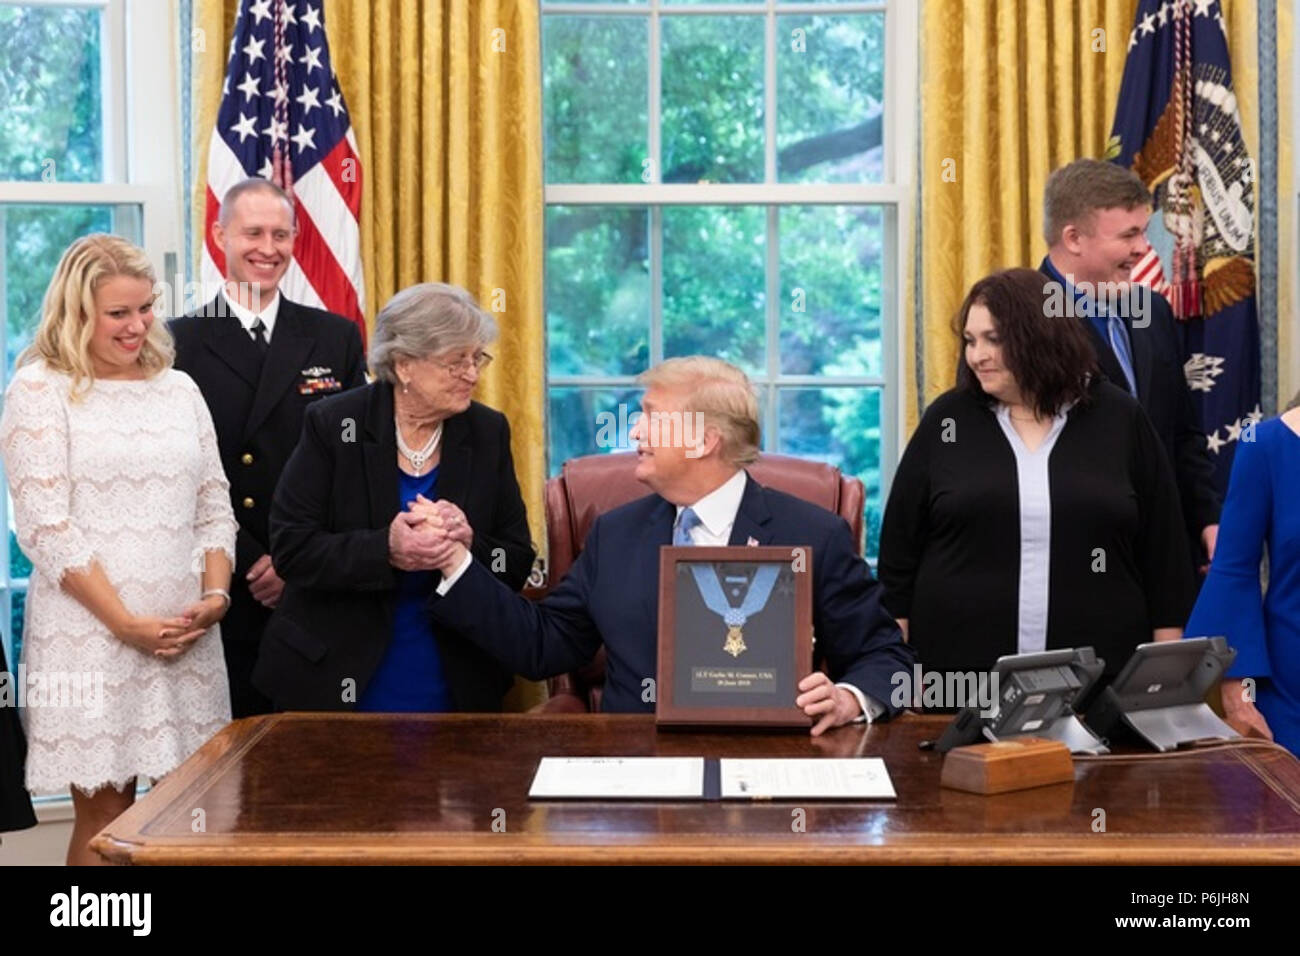 WASHINGTON, DC - WEEK OF JUNE 24: President Donald J. Trump welcomes Mrs. Pauline Conner, the widow of Medal of Honor recipient, the late U.S. Army 1st Lt. Garlin Murl Conner, and family members to the Oval Office on Tuesday, June 26, 2018, at the White House  People:  President Donald Trump Stock Photo